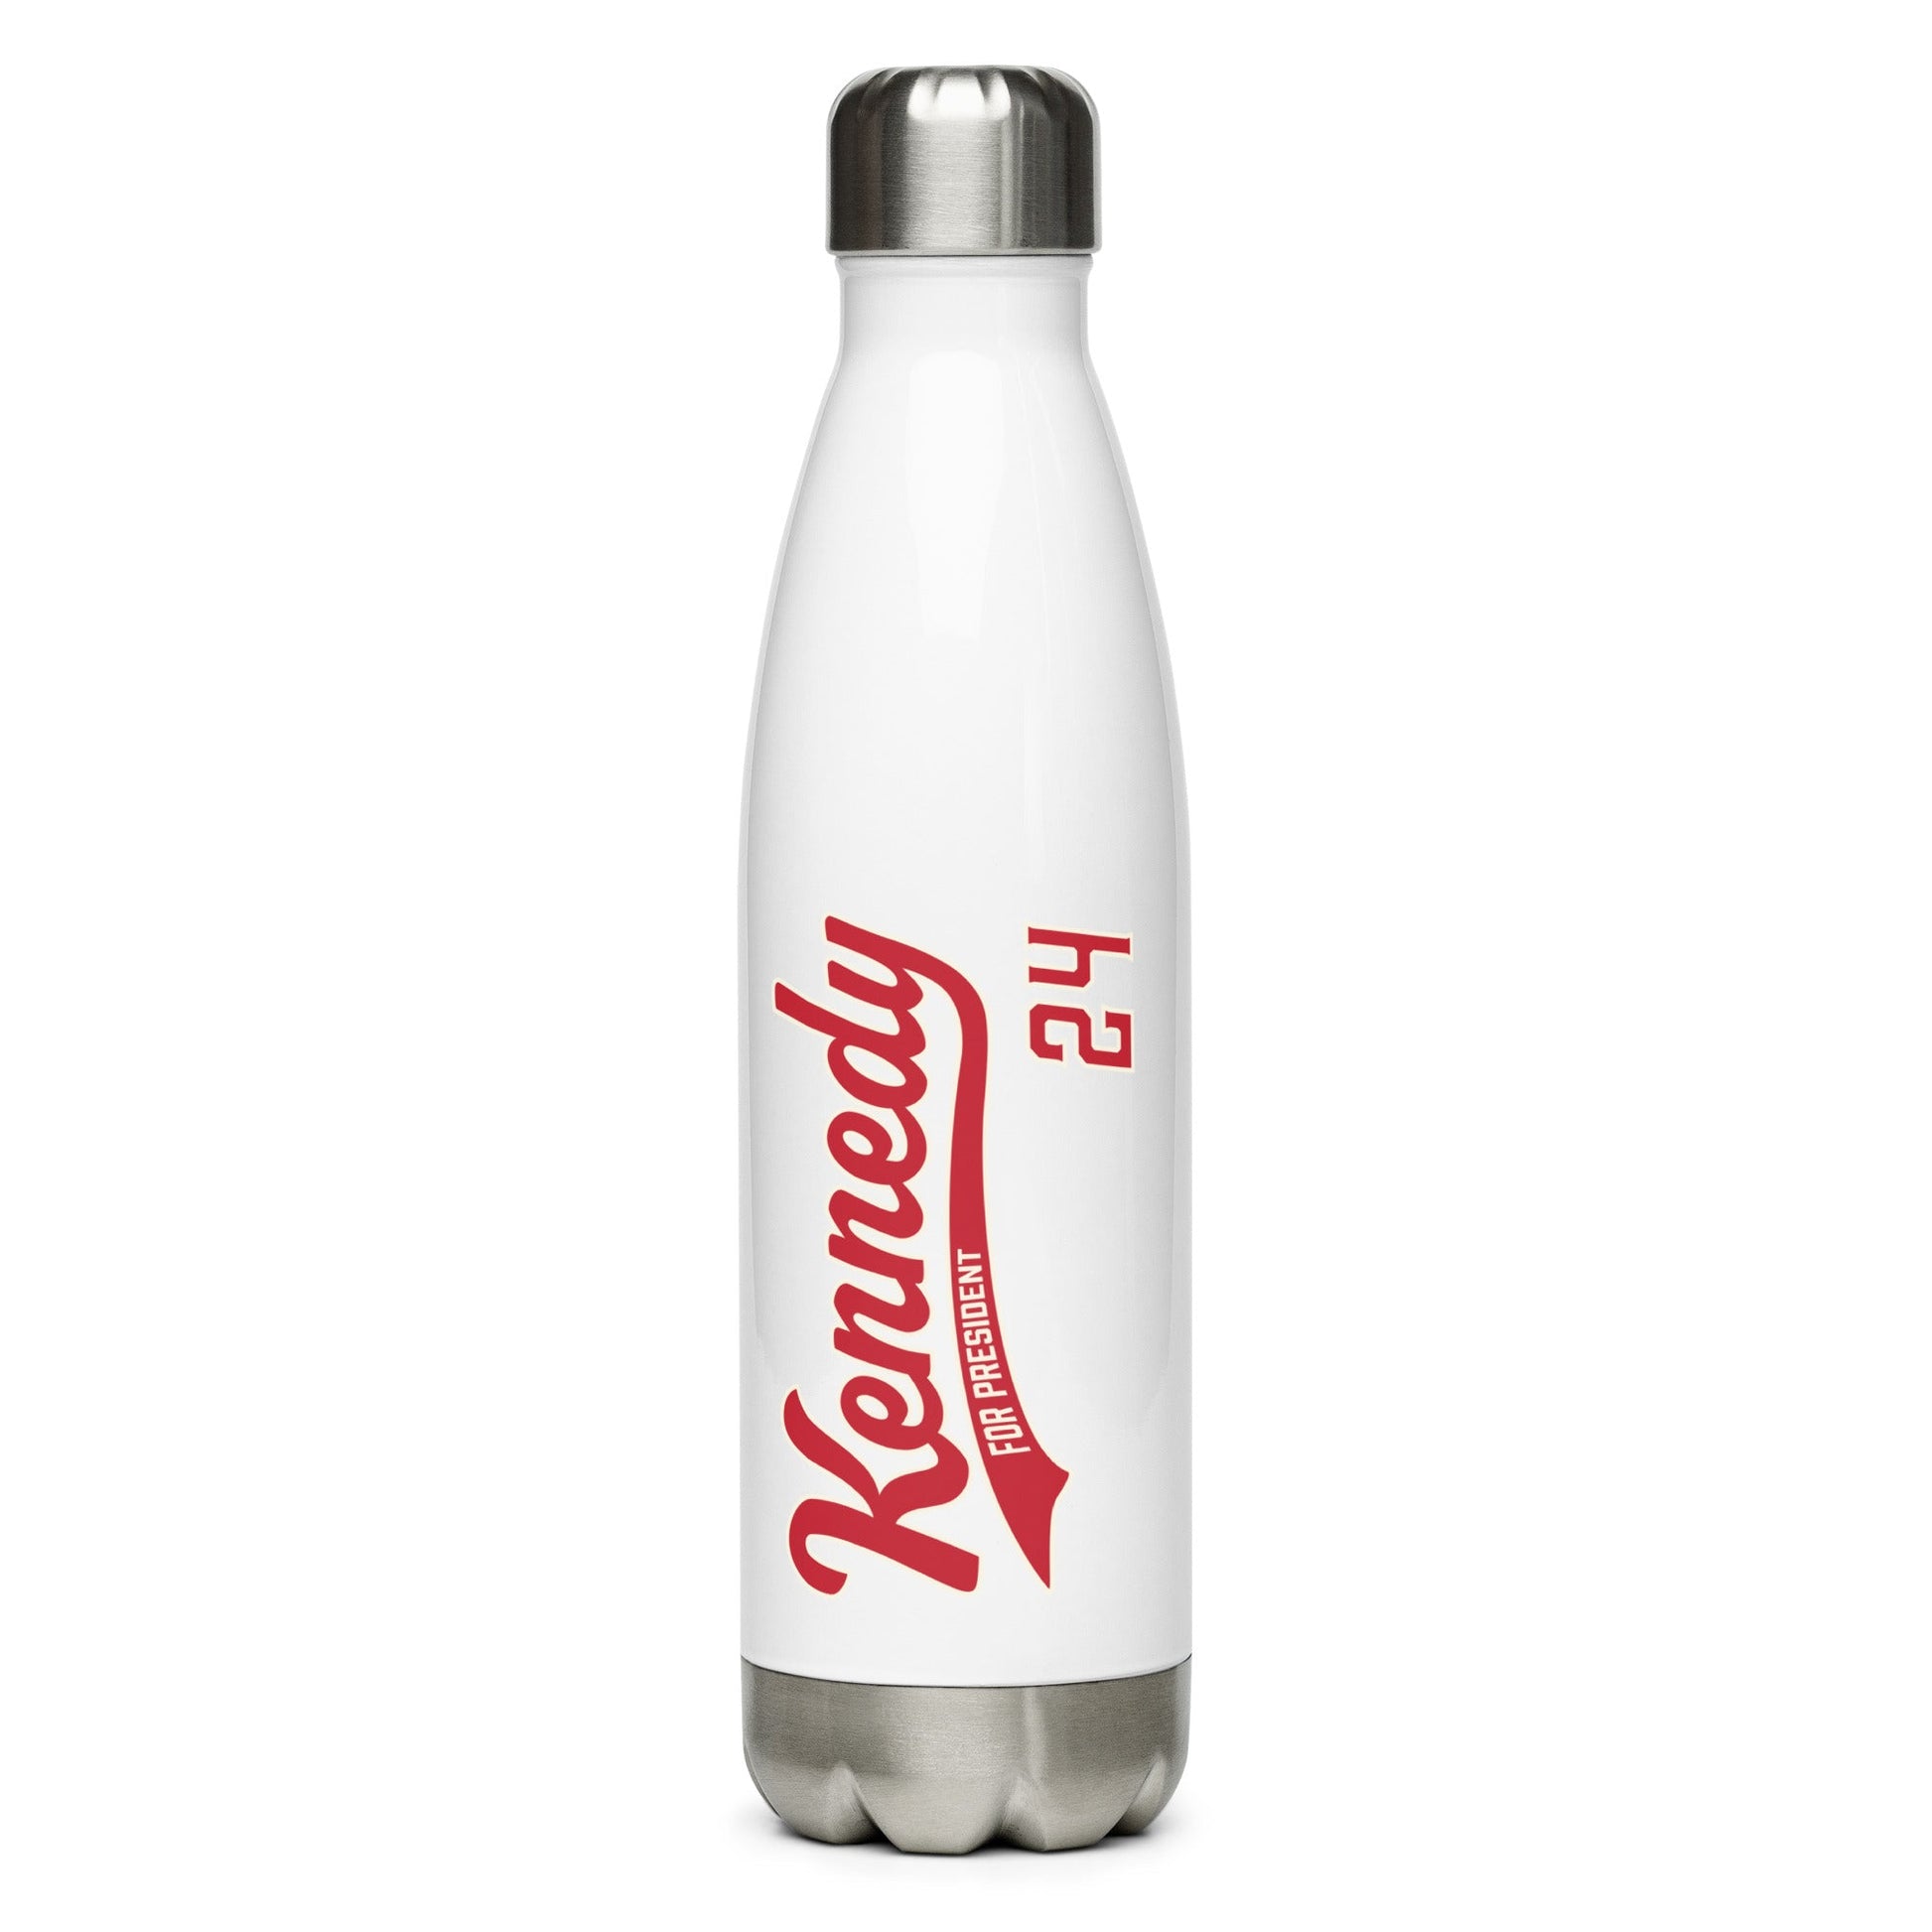 Kennedy Baseball Stainless Steel Water Bottle - TEAM KENNEDY. All rights reserved